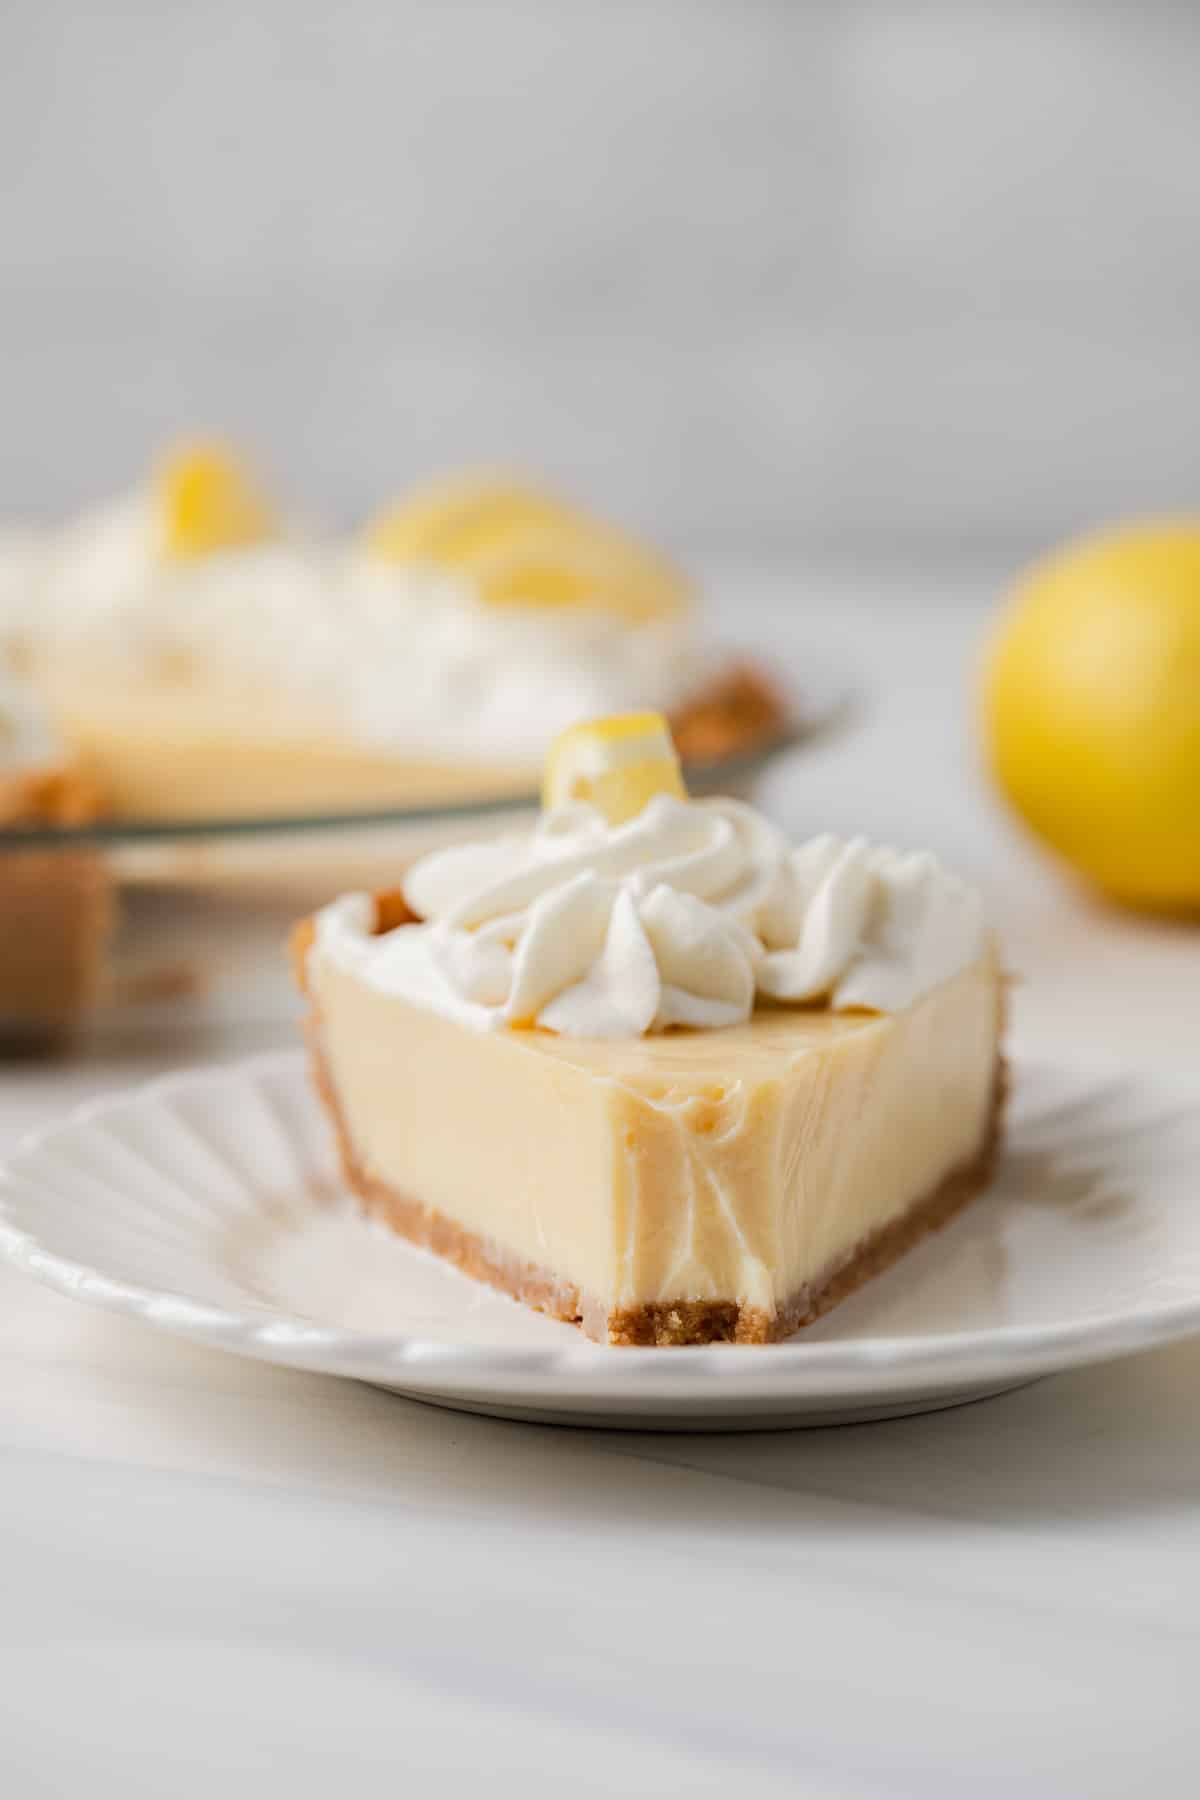 Slice of lemon pie with bite taken out.